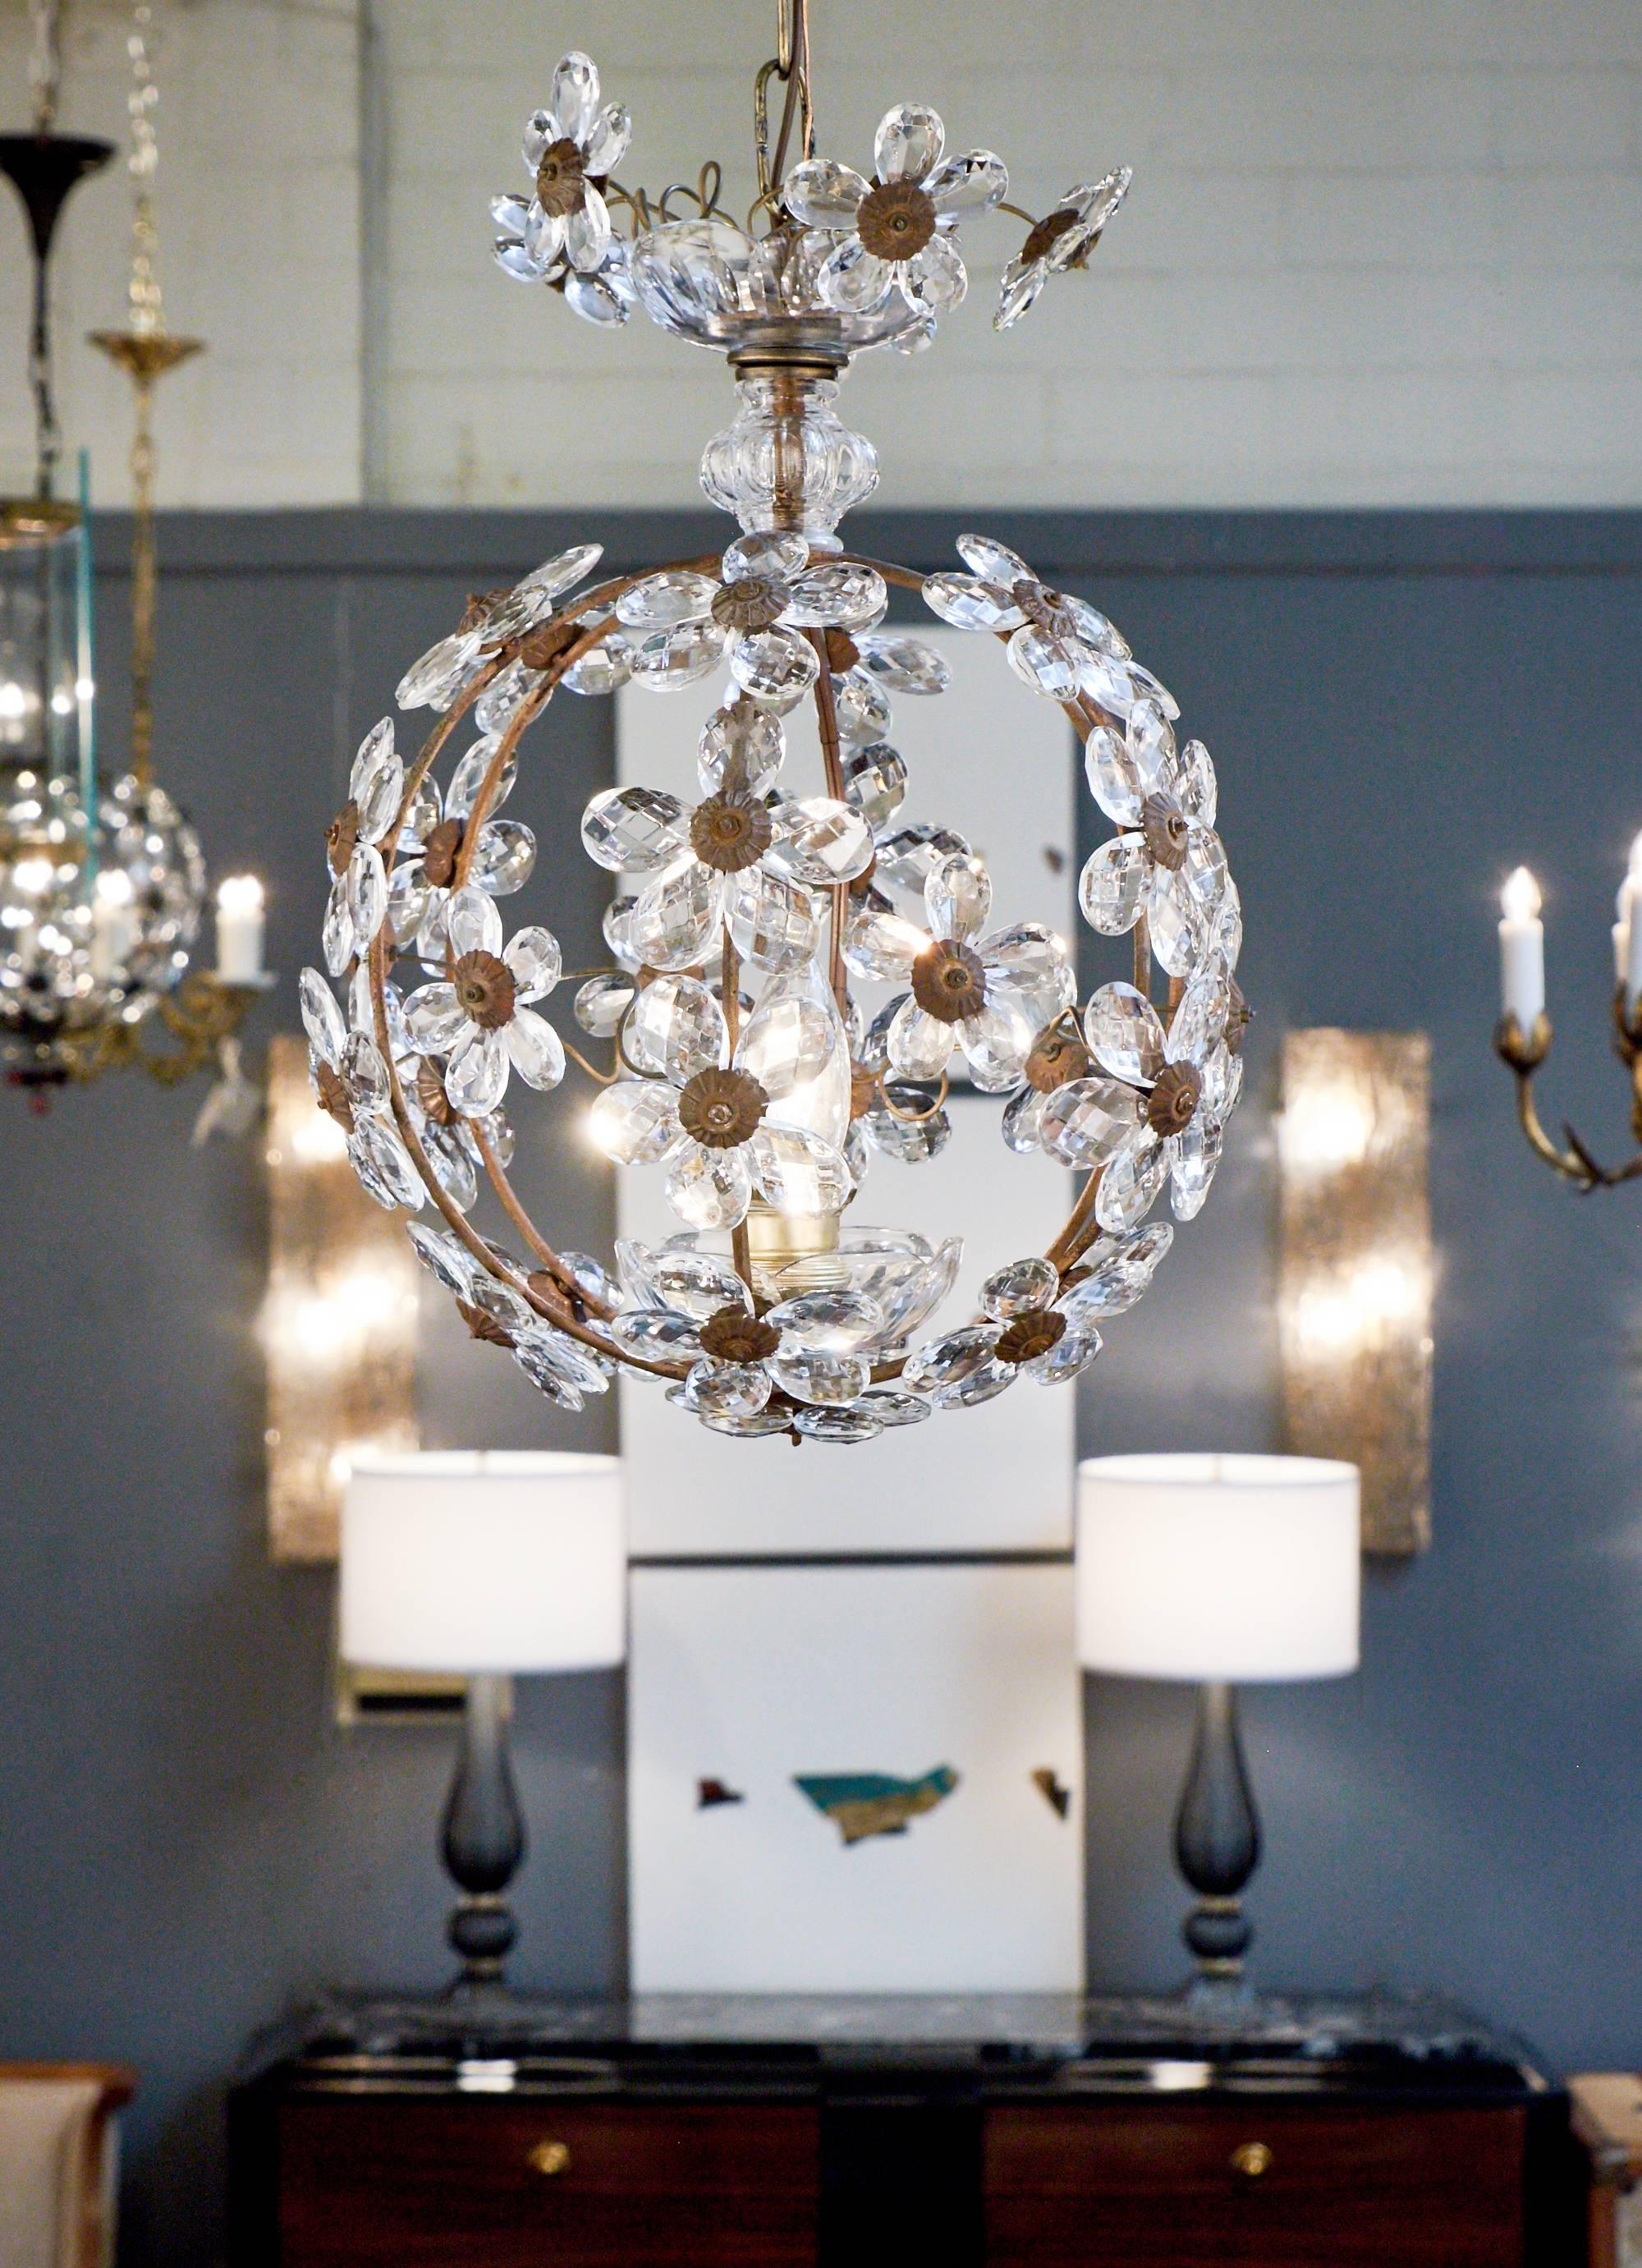 A lovely French antique pendant light chandelier of brass with flowers made of crystal petals. We love the simple round shape of this light fixture and the crystal canopy.

Holds one medium base bulb, rewired for the US. Height with brass chain